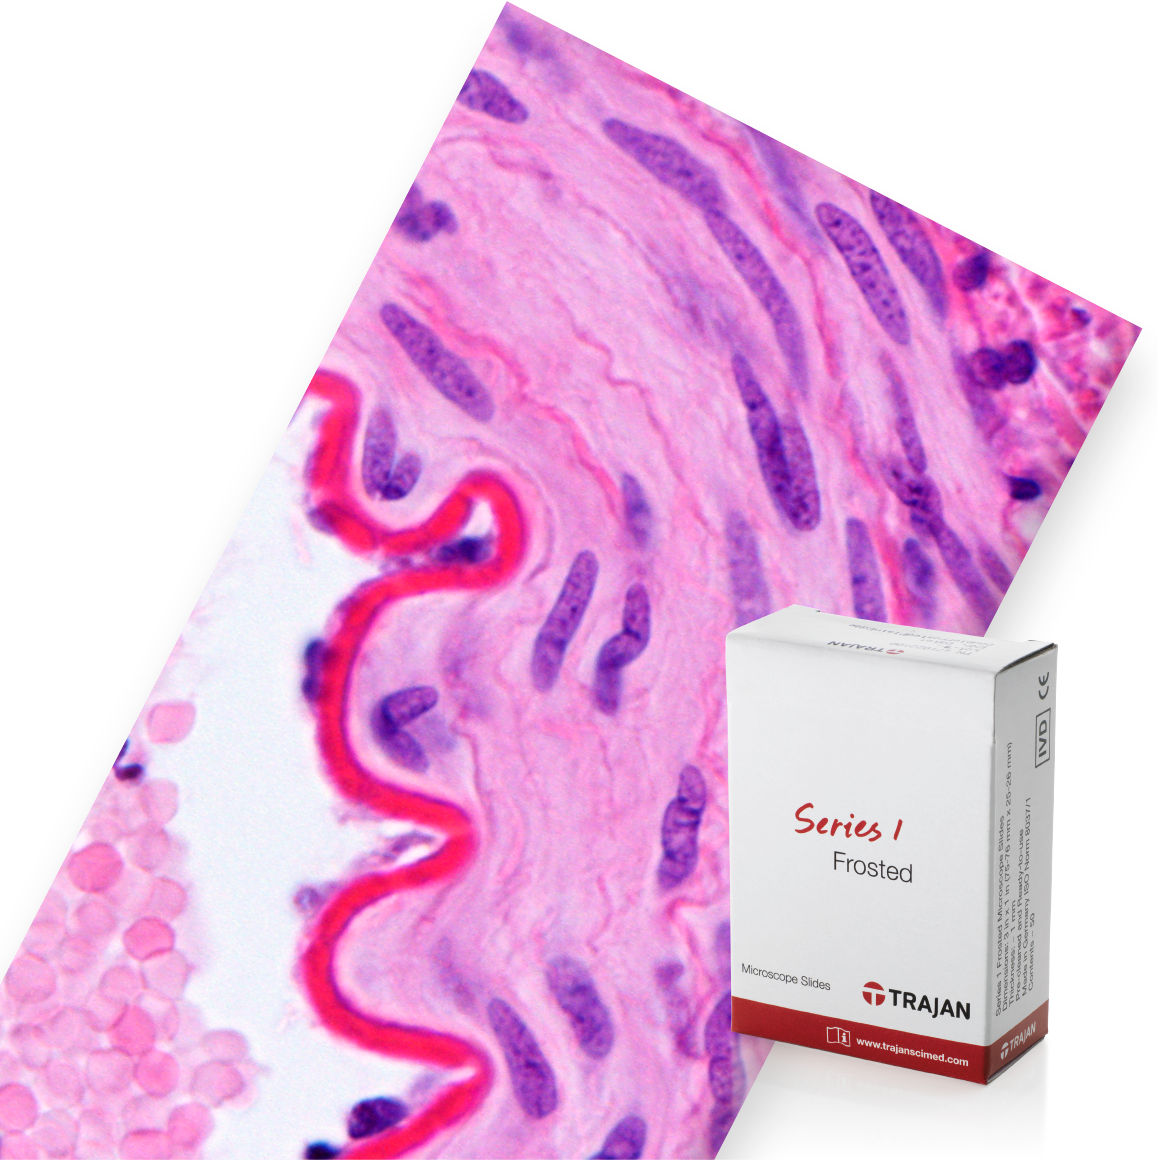 Trajan Series 1 Frosted Microscope Slides